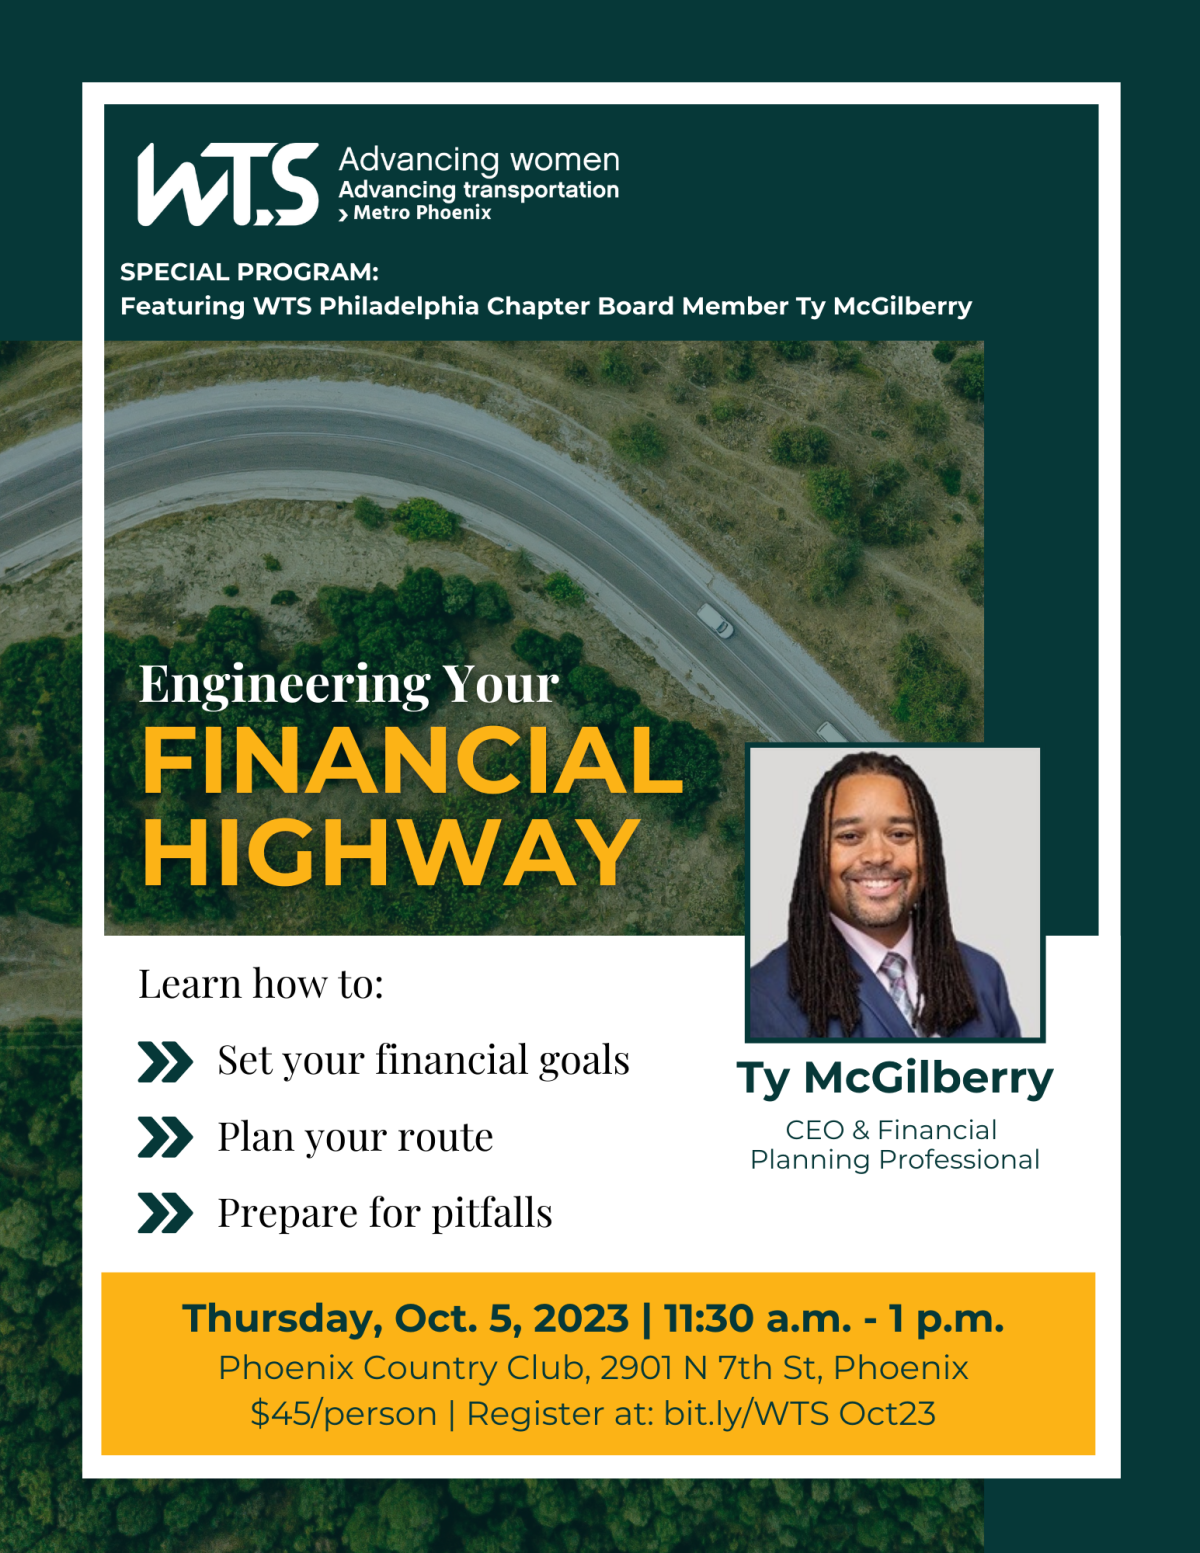 WTS Metro Phoenix presents Engineering Your Financial Highway with Ty Milberry on October 5 at the Phoenix Country Club. Register to learn how to set and achieve financial goals.